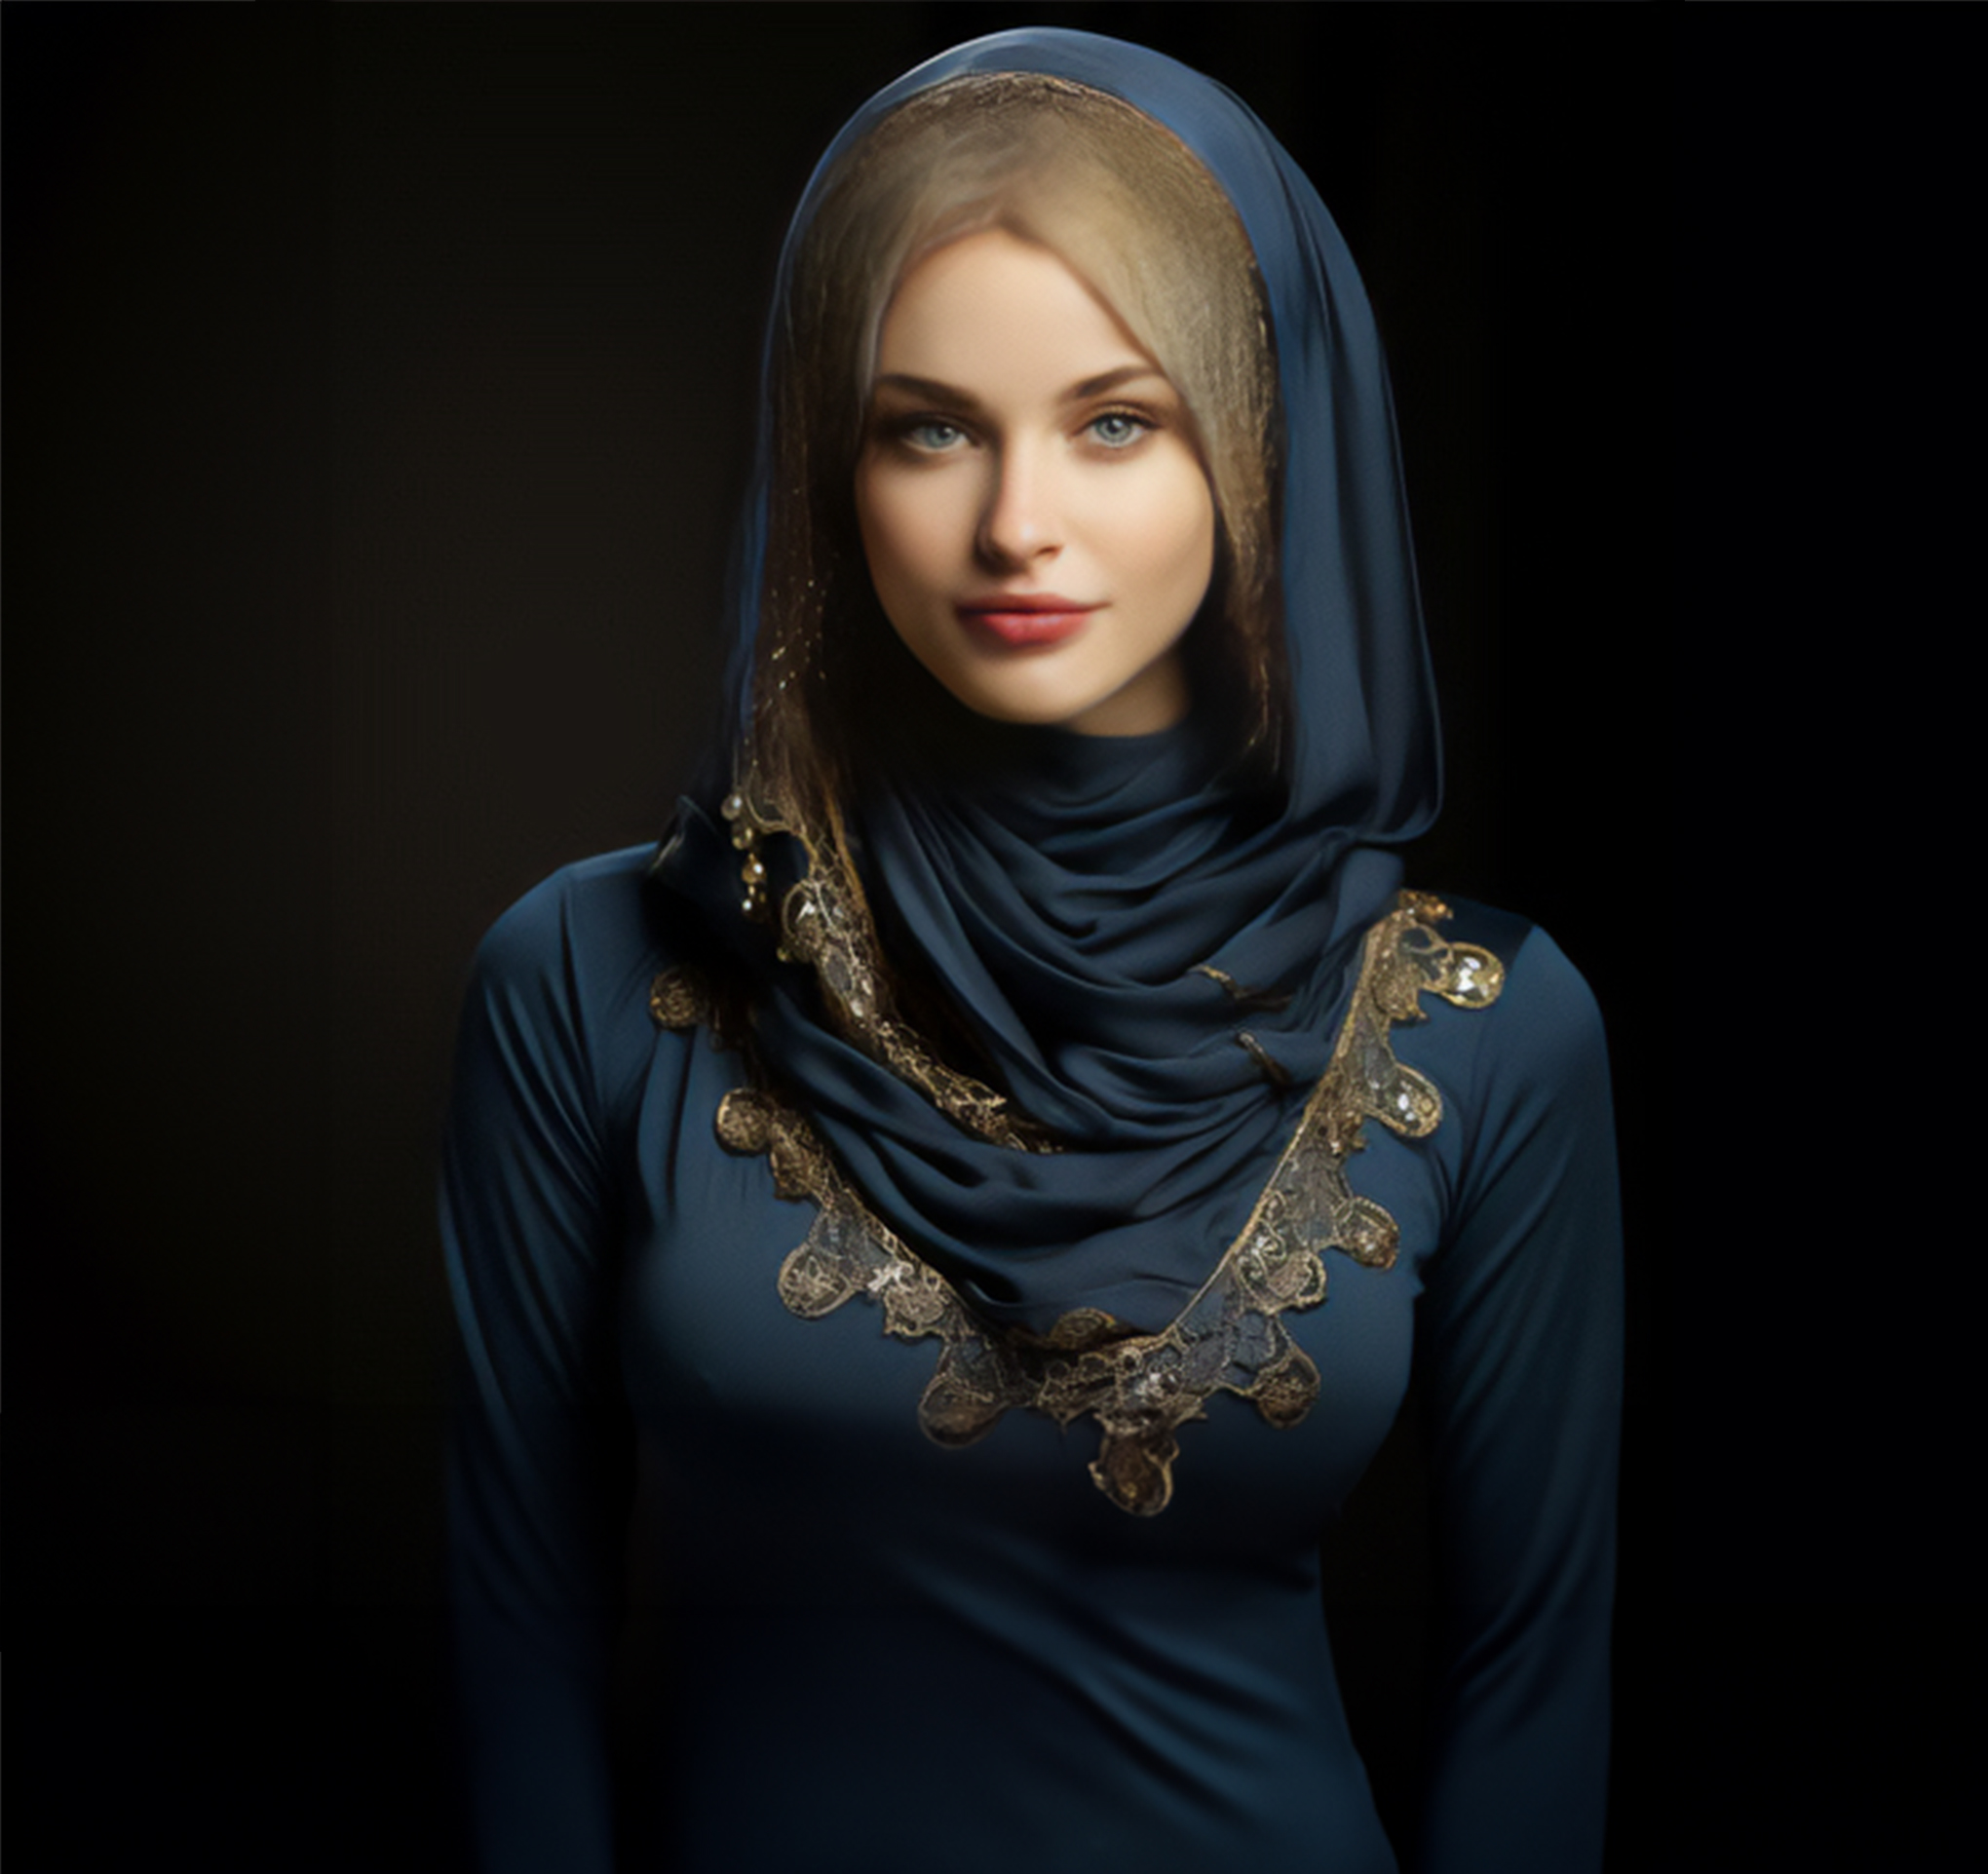 Beautiful Muslim Girl In Plain Black Background Jpeg Download For Free Without Watermark And Royalty Free